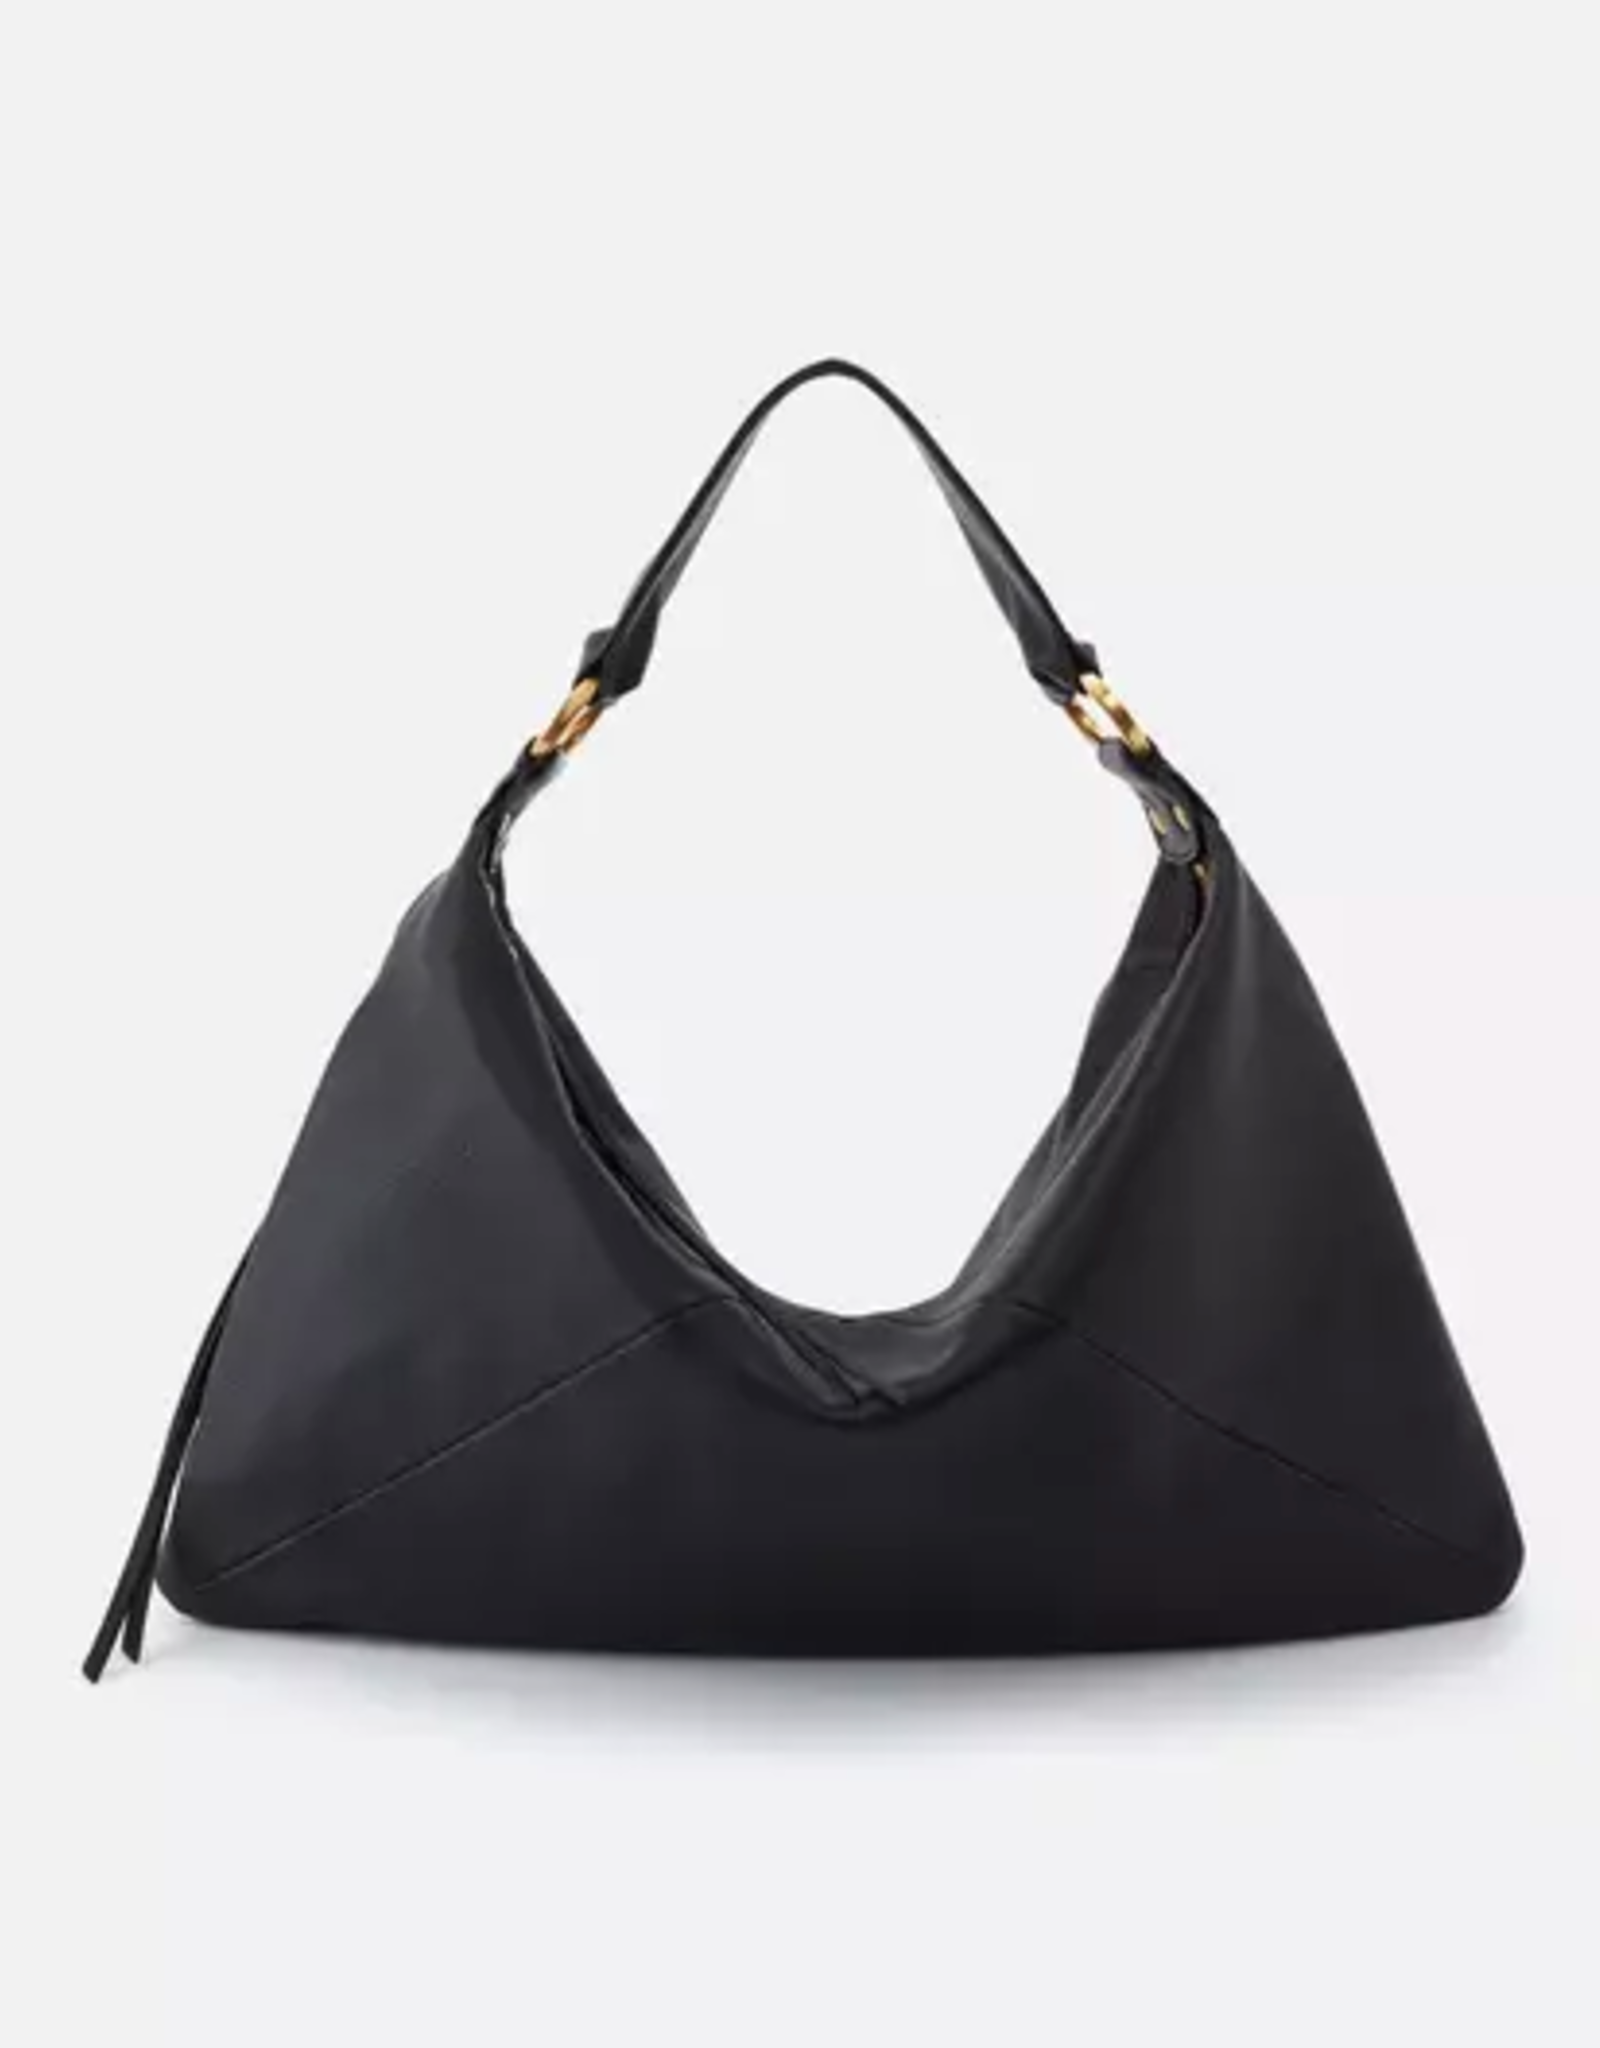 Faux Leather Women Handbags Shoulder Hobo Bag Purse With Long Strap(Fits up  to 12.9